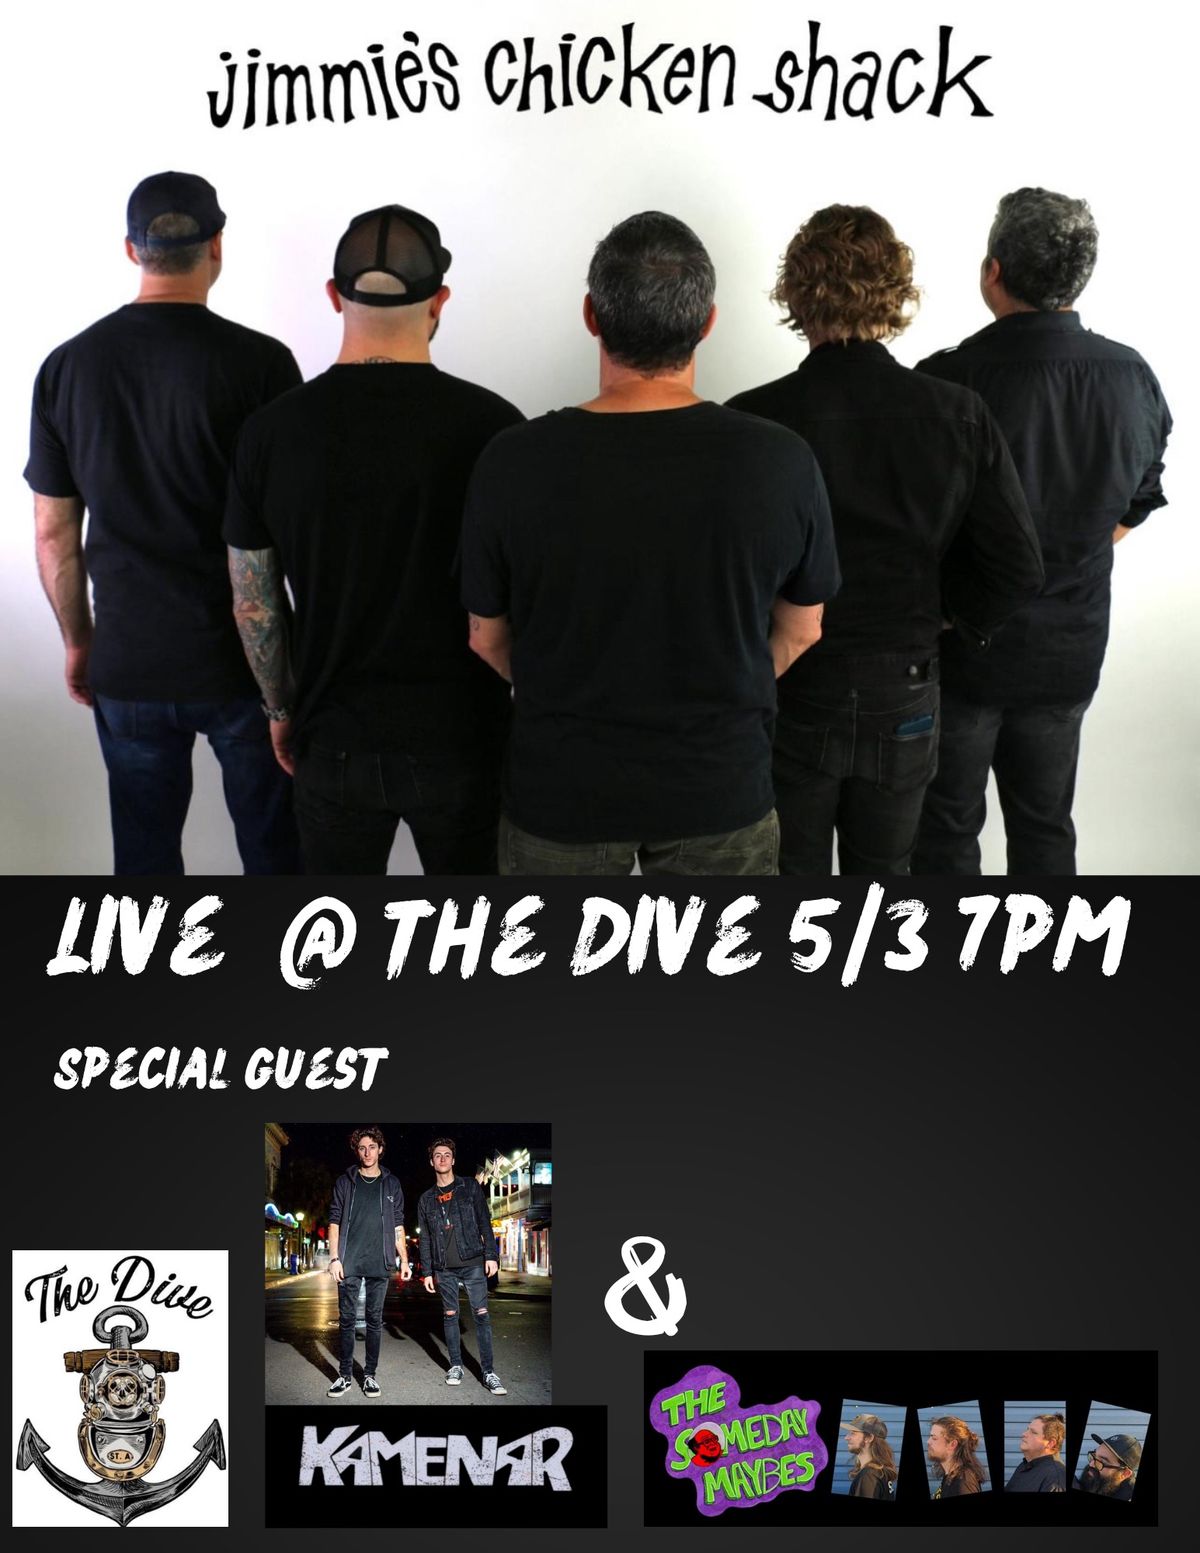 Jimmies\u2019s Chicken Shack Live @ The Dive with special guest Kamenar & The Someday Maybe\u2019s